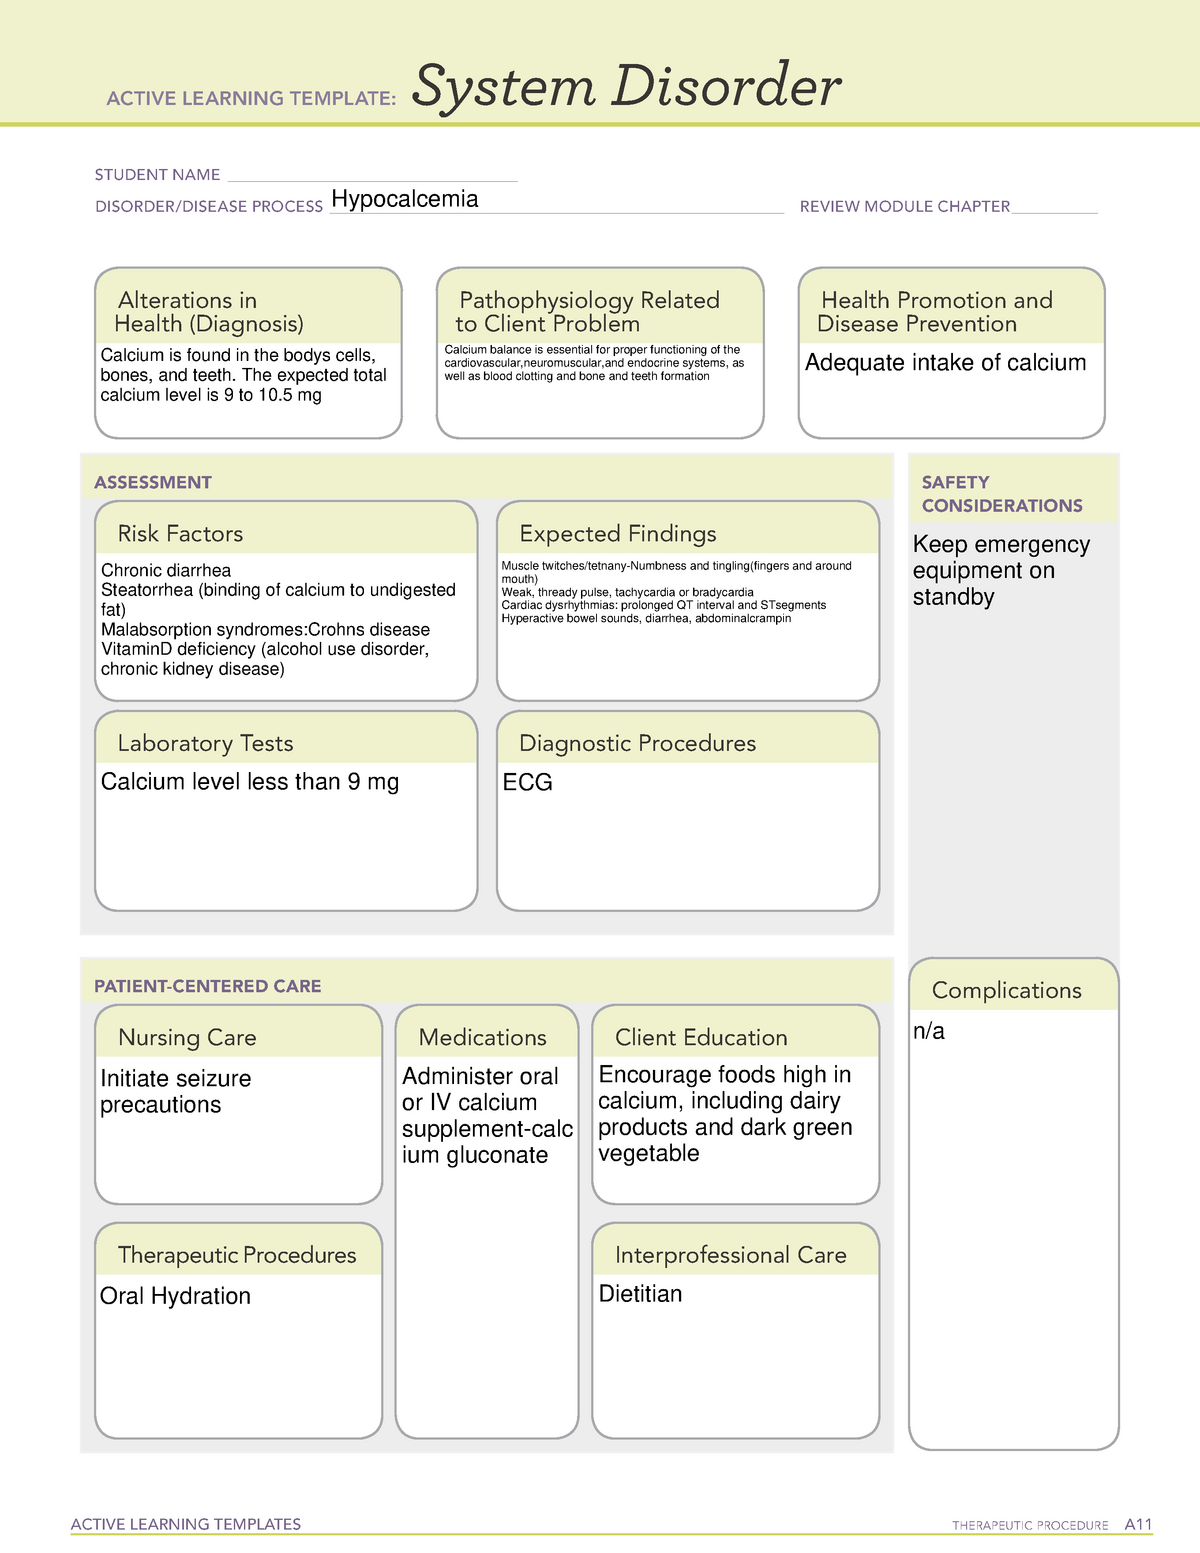 Remediation (Hypocalcemia) ACTIVE LEARNING TEMPLATES THERAPEUTIC